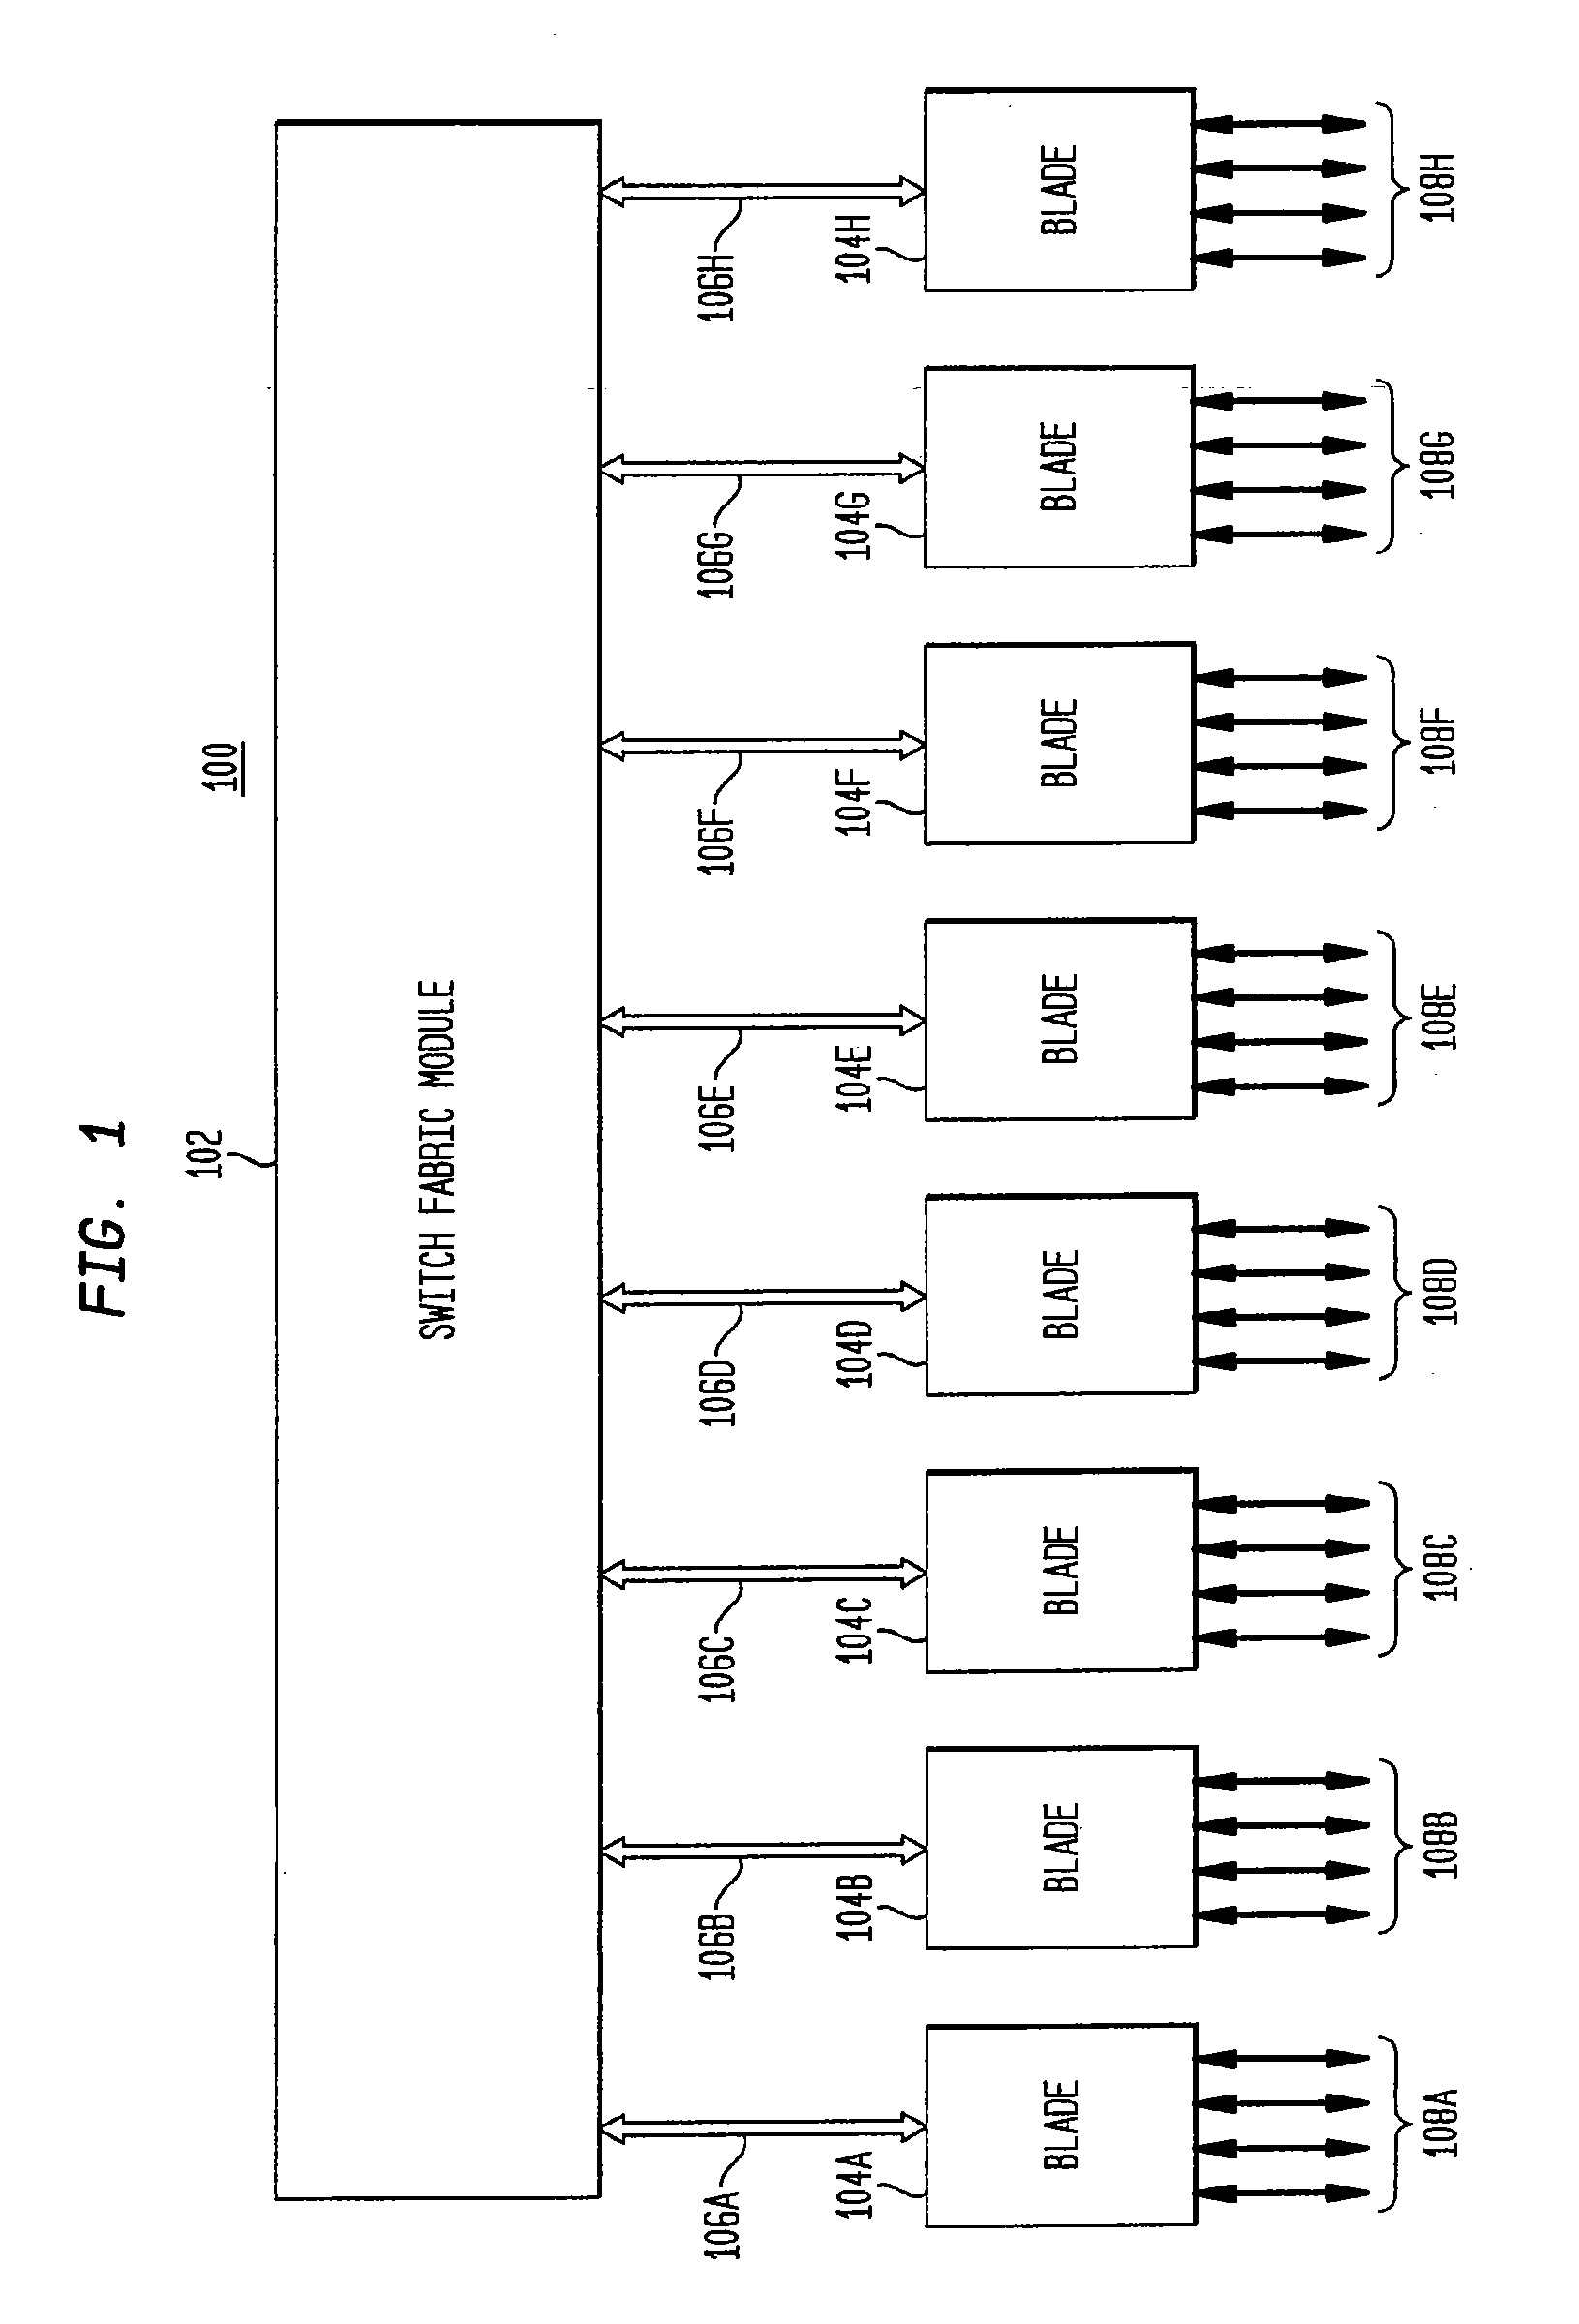 Backplane Interface Adapter with Error Control and Redundant Fabric